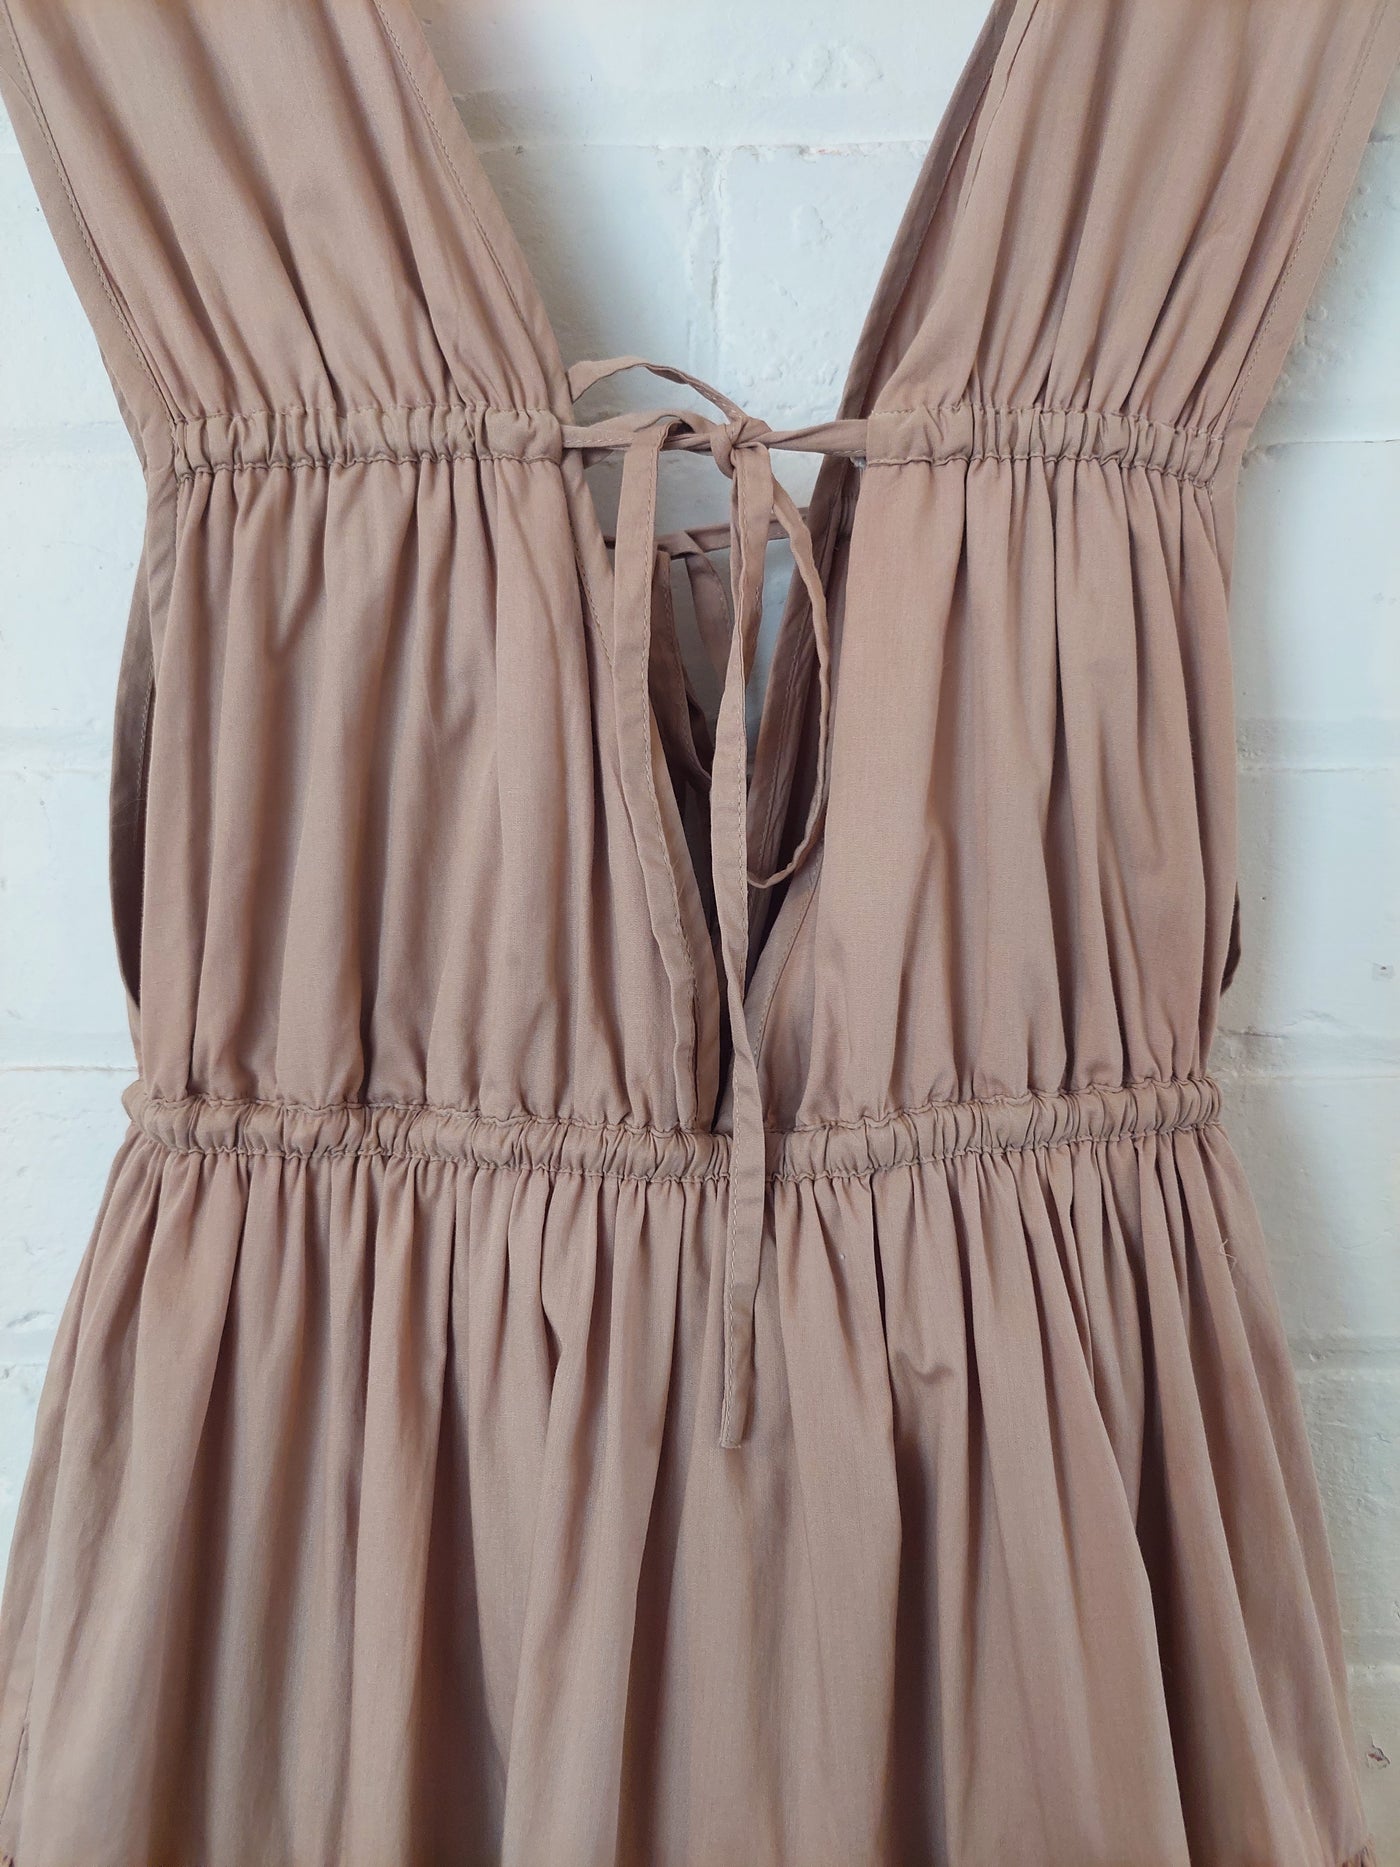 Palm Noosa Wish You Were Here Midi Dress in Classic Brown Hue, Size 8